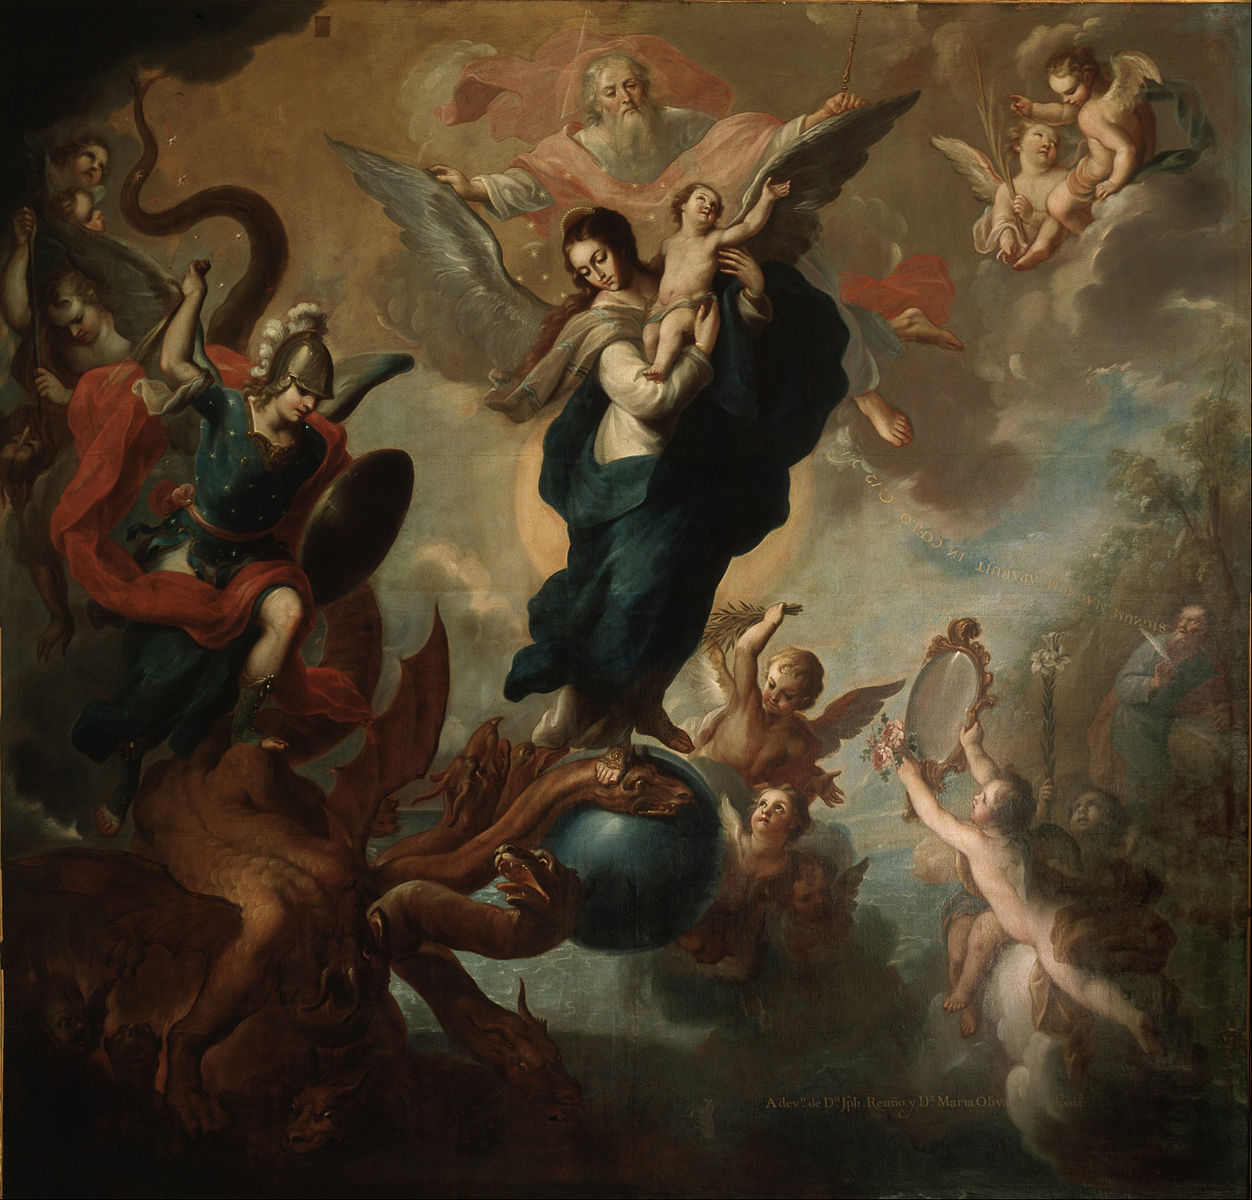 A religious scene of a woman holding a baby with wings and a person slaying a 5 headed animal